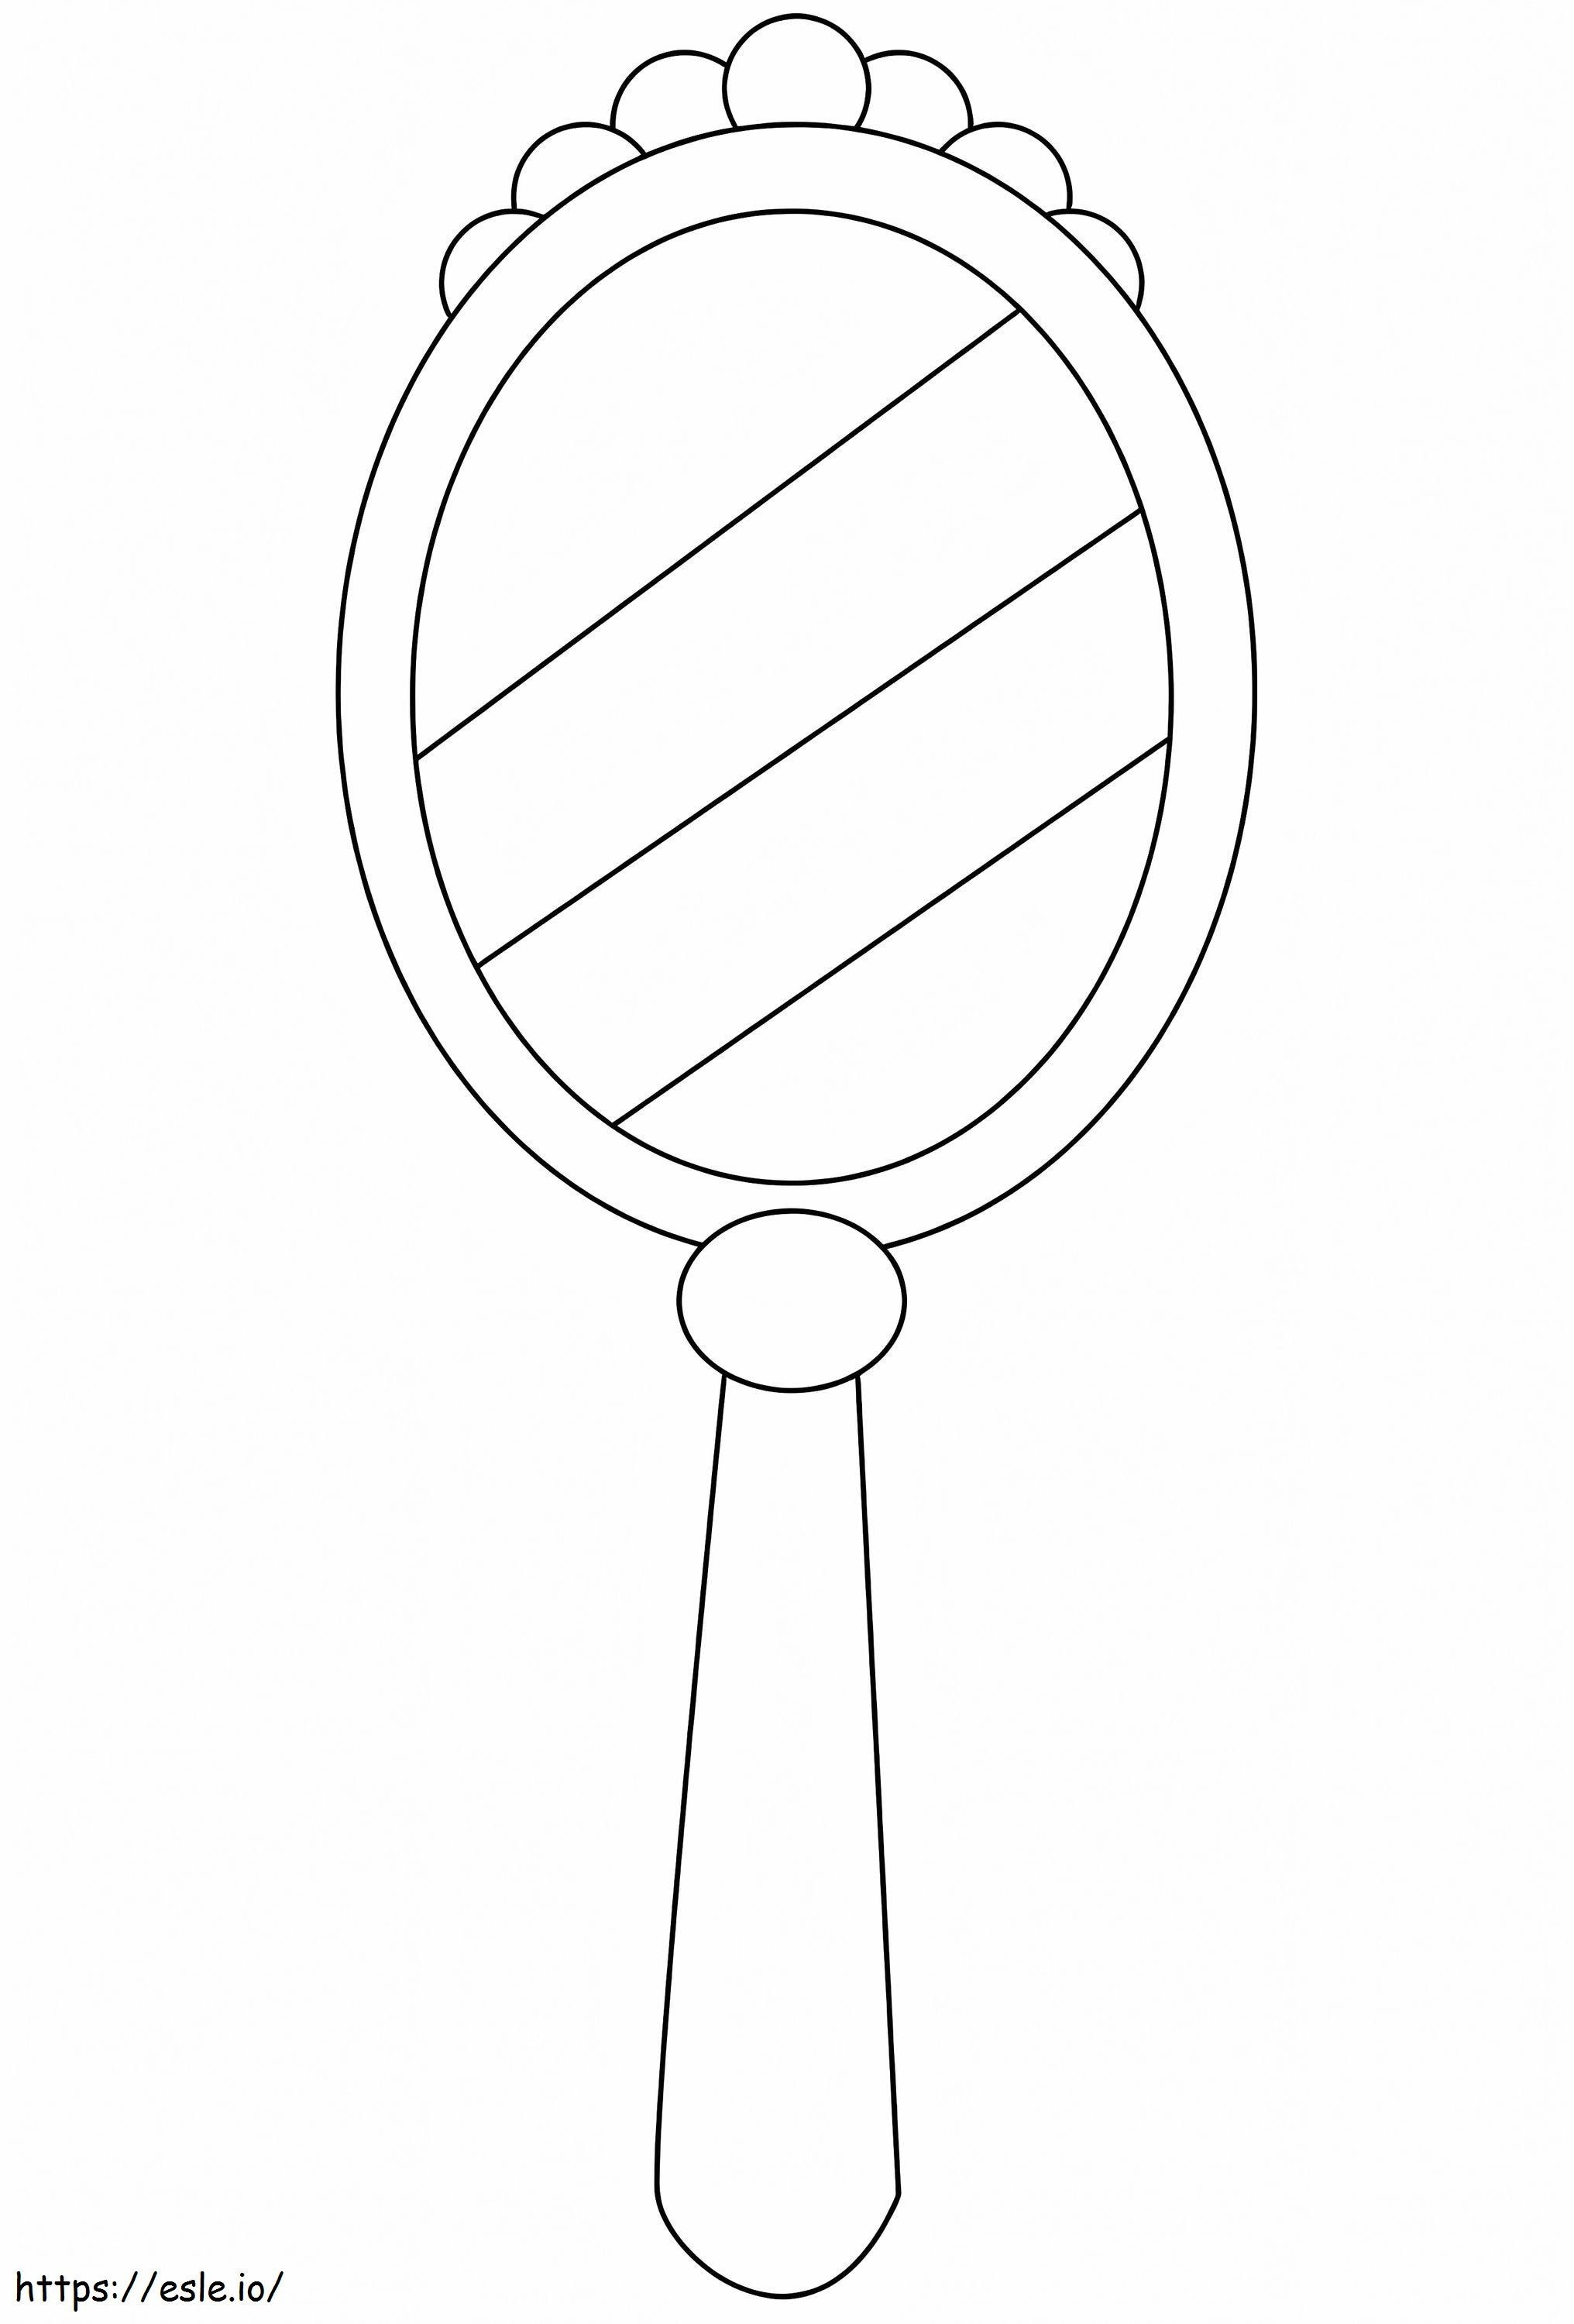 A Hand Mirror coloring page